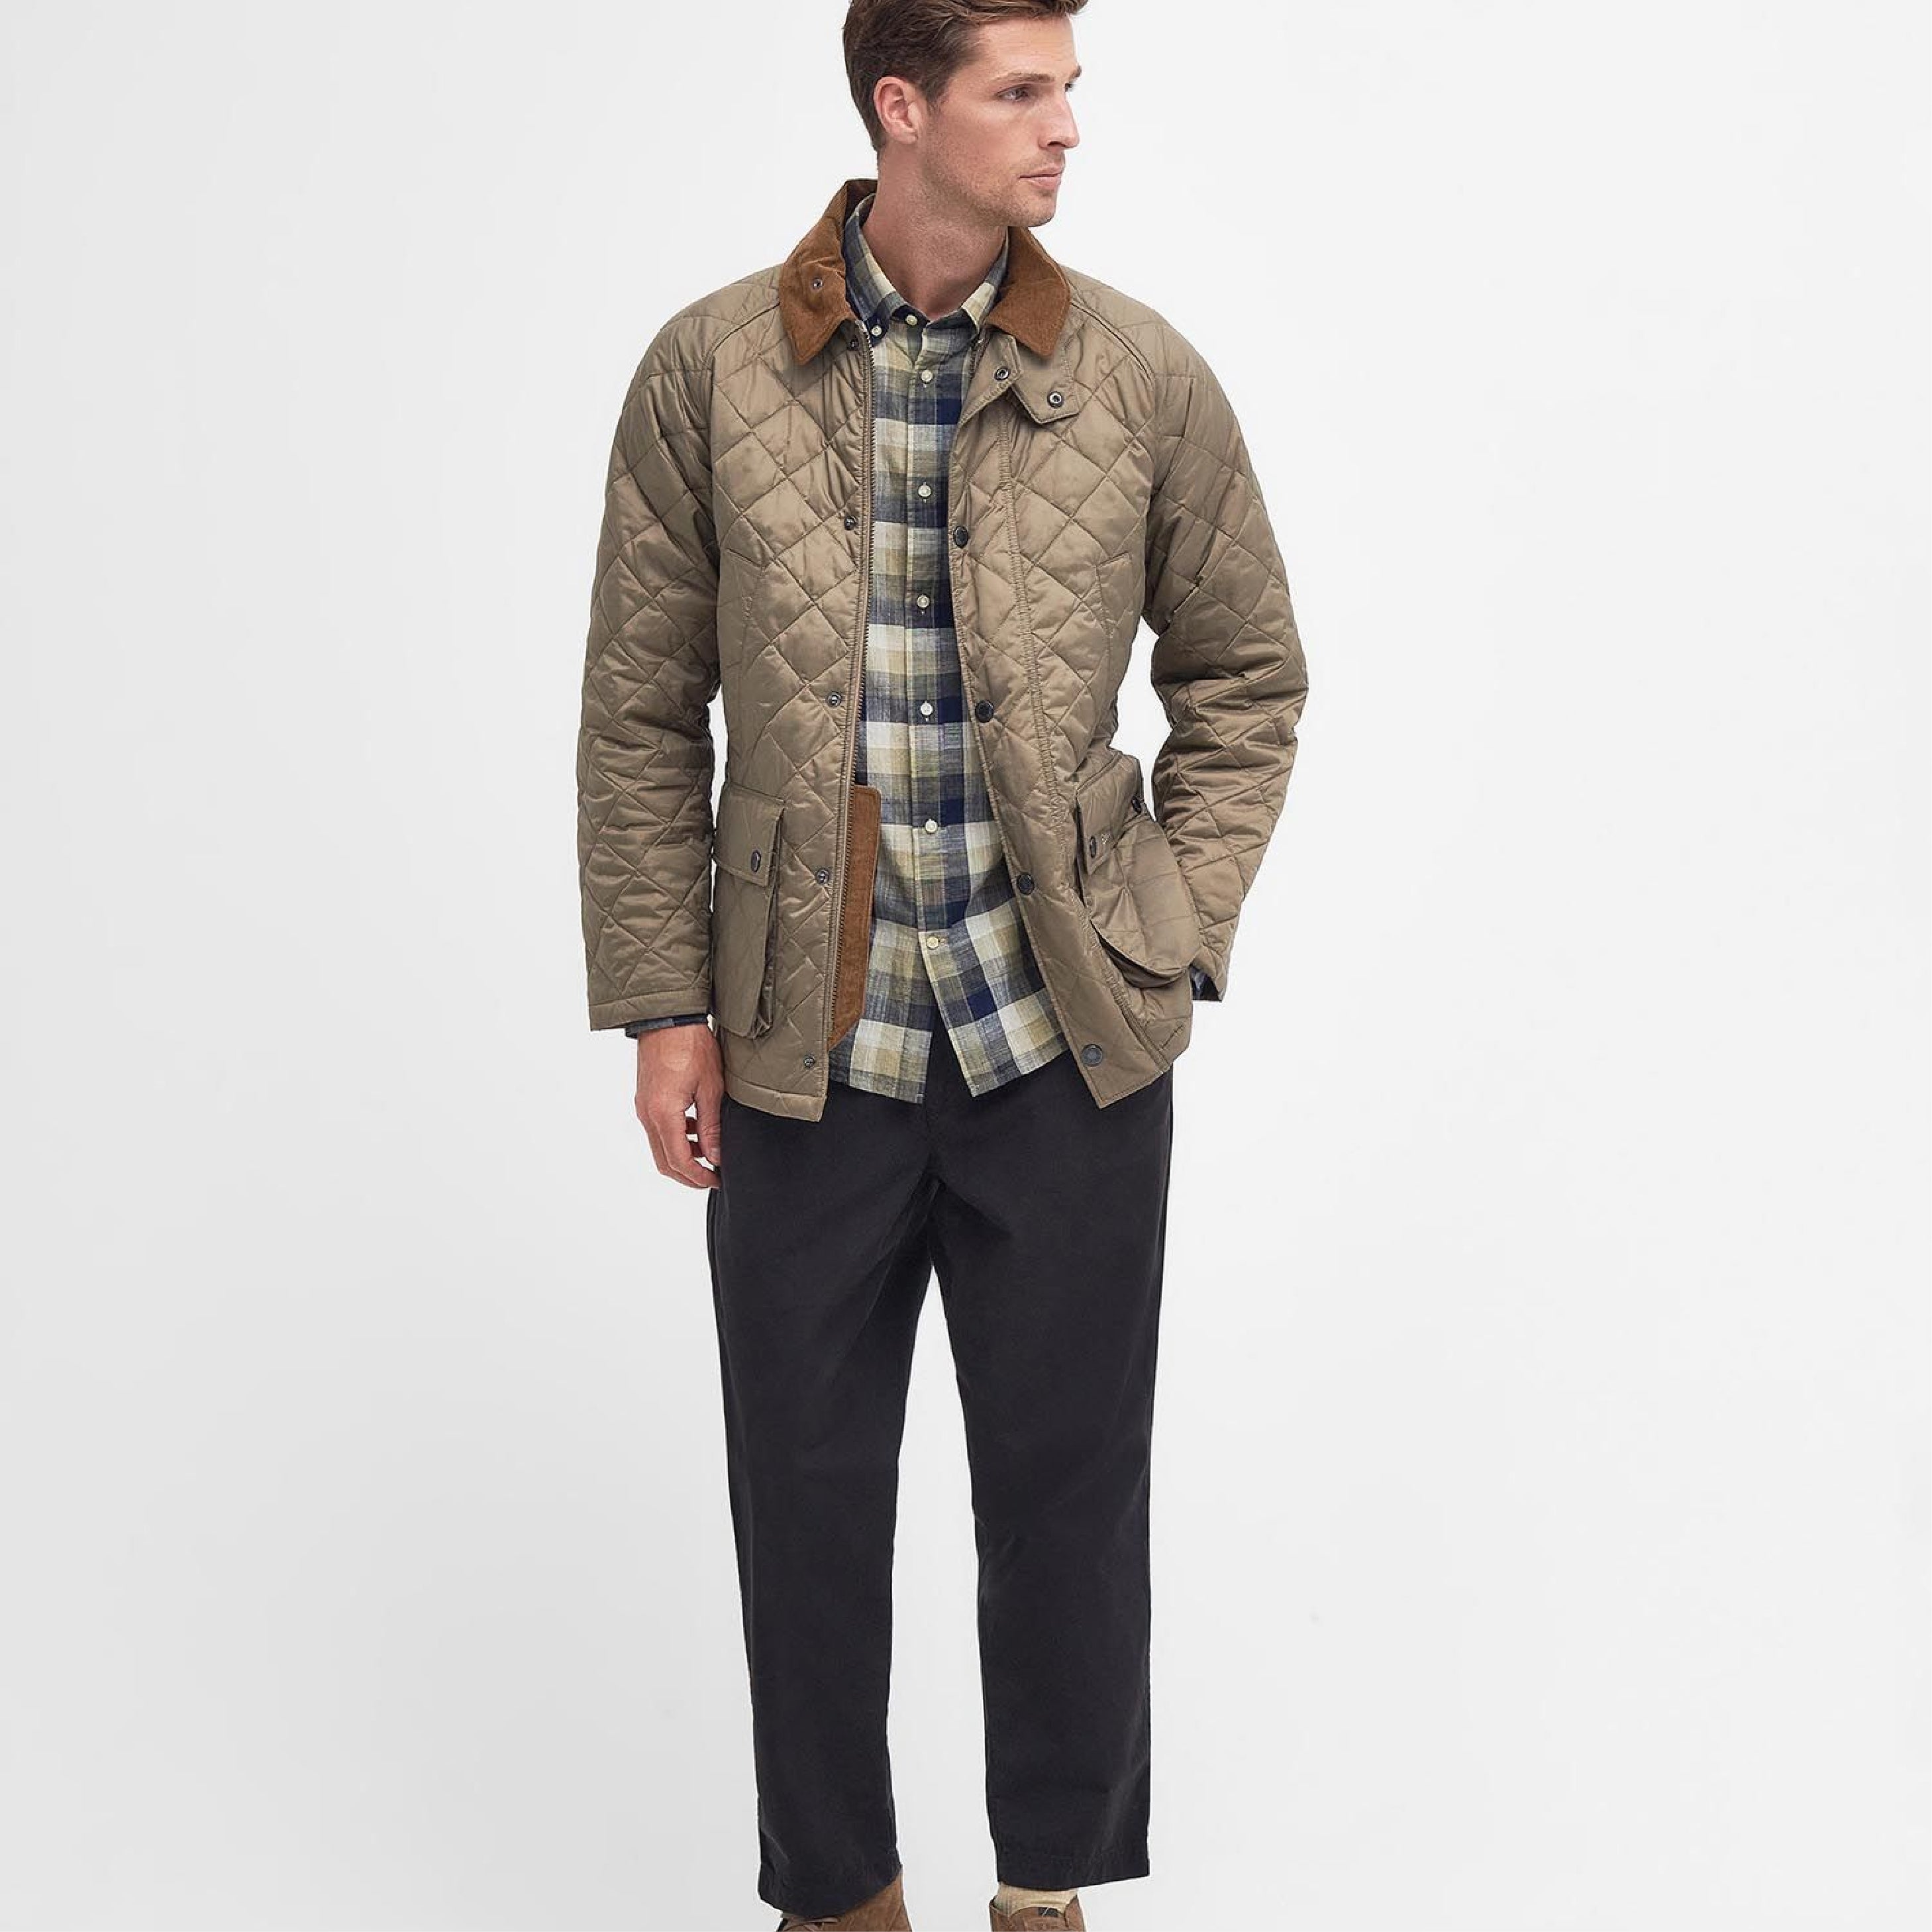 Barbour Ashby Quilt